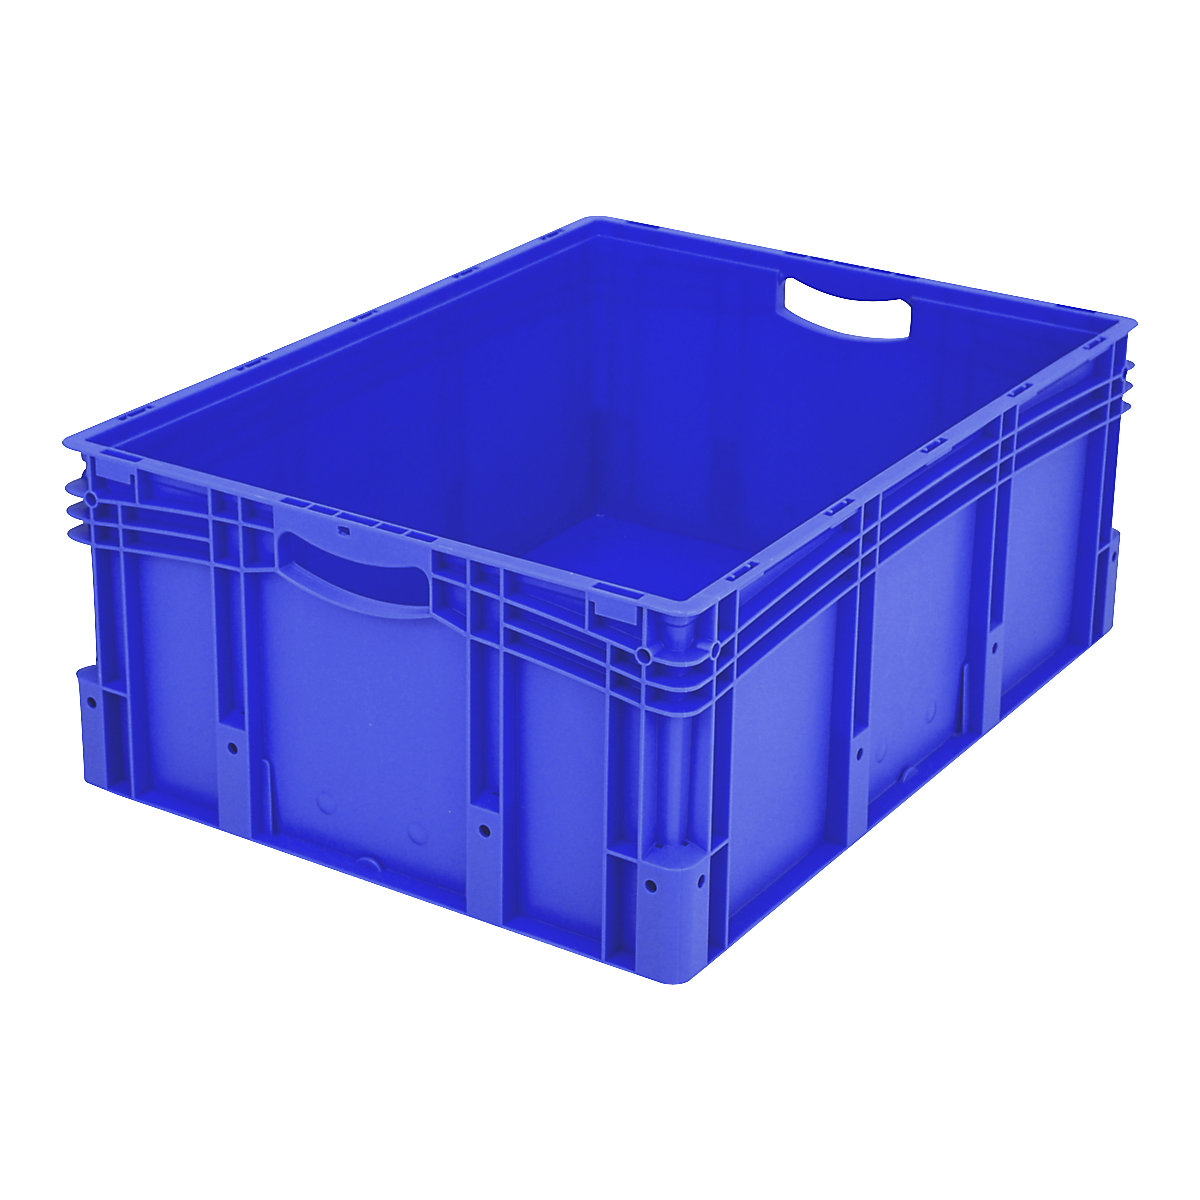 XL Euro stacking container – BITO, standard model, LxWxH 800 x 600 x 320 mm-16